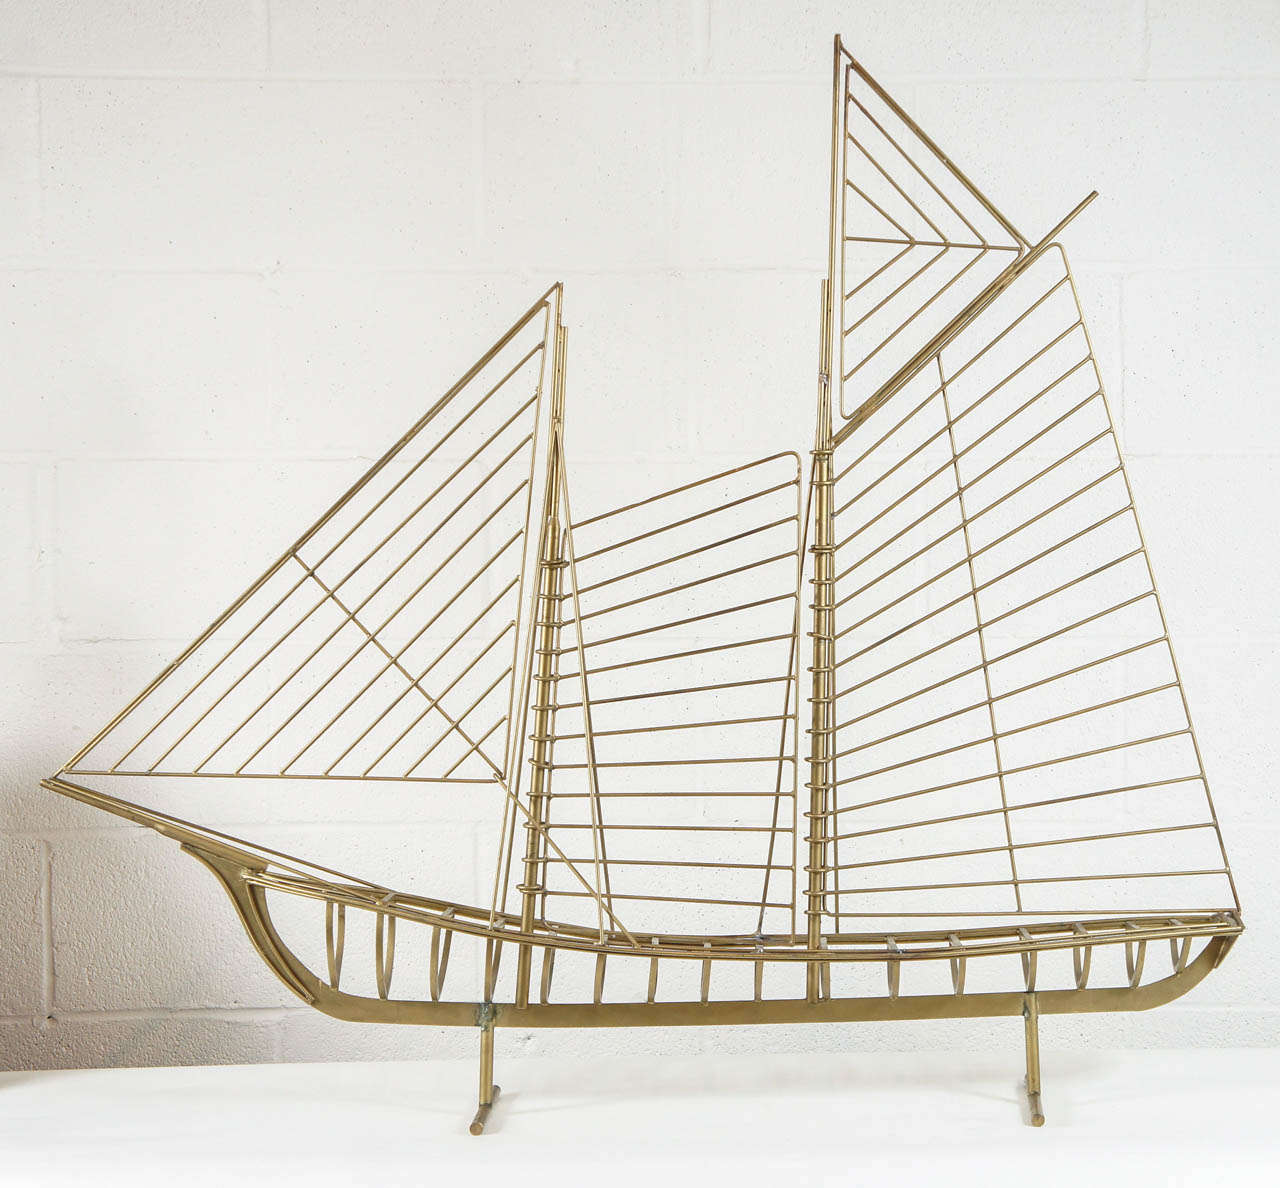 Here is a linear sculpture of a sailboat by Curtis Jere. Great form.